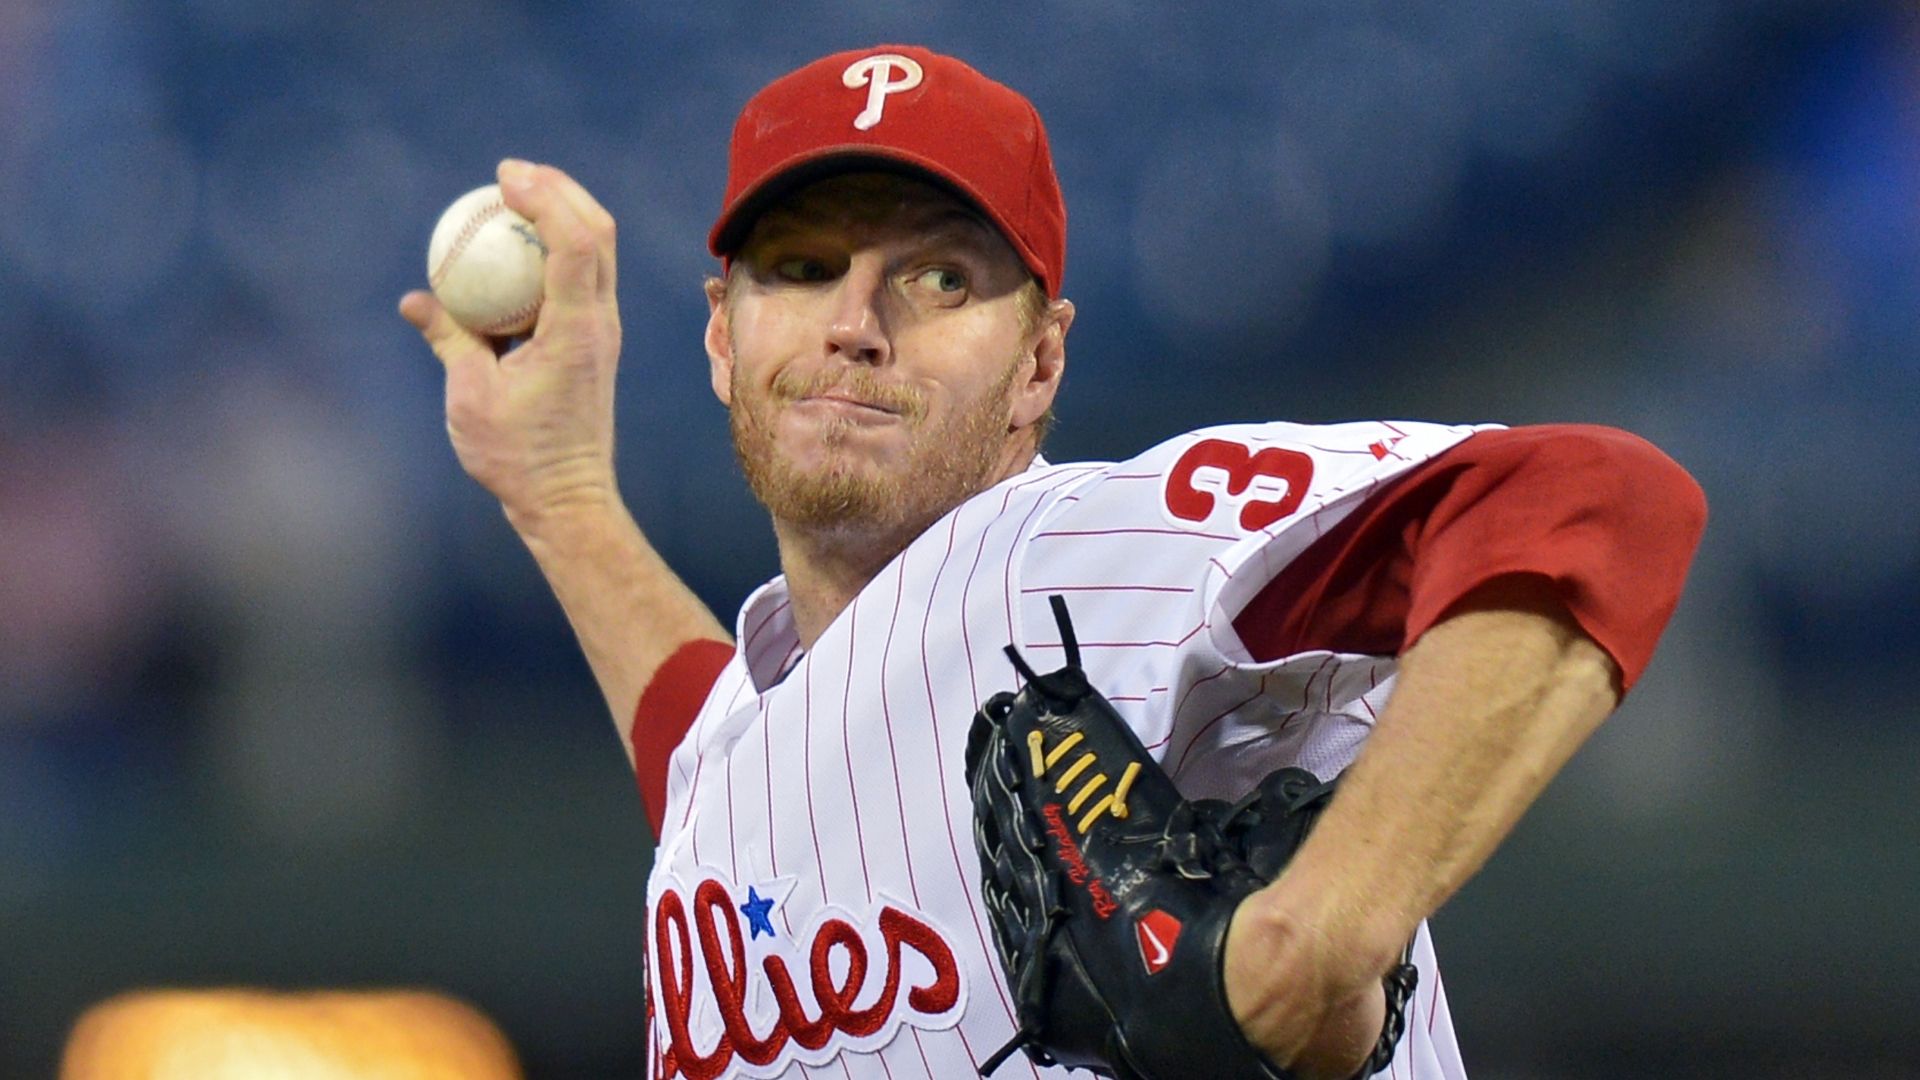 Halladay's career filled with masterful performances